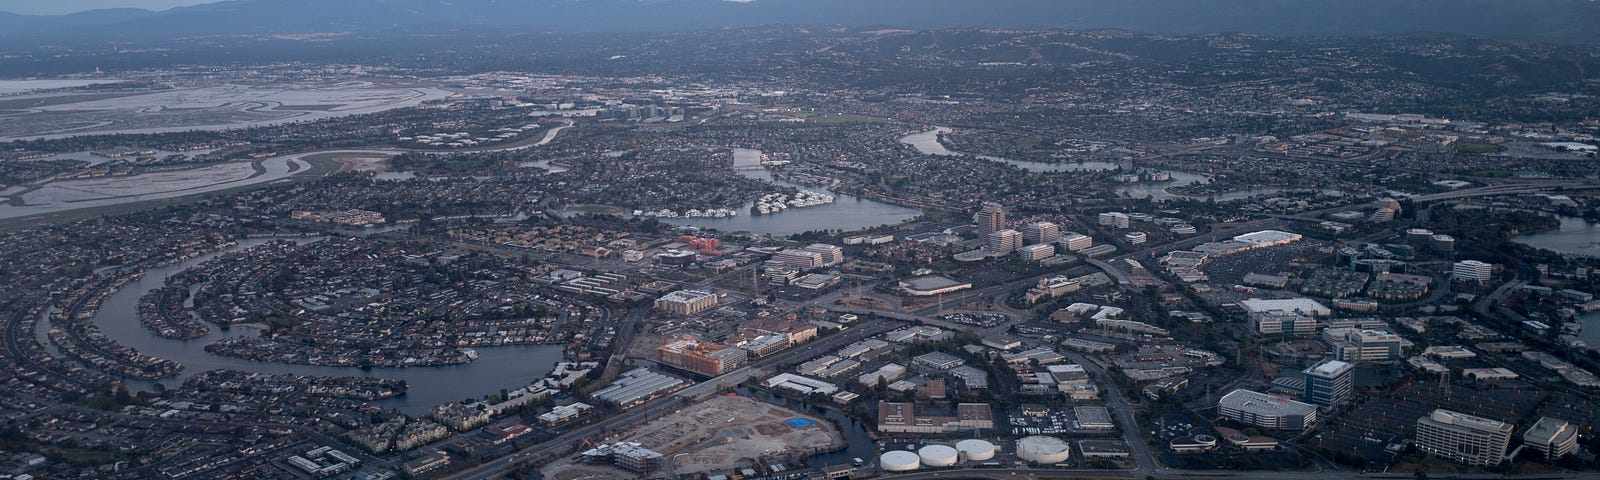 Aerial view of Silicon Valley at dusk, with a portion of the San Mateo/Hayward Bridge visible, as well as Foster City, including the California headquarters of Gilead Sciences, Visa, and Conversica, California, July, 2016.